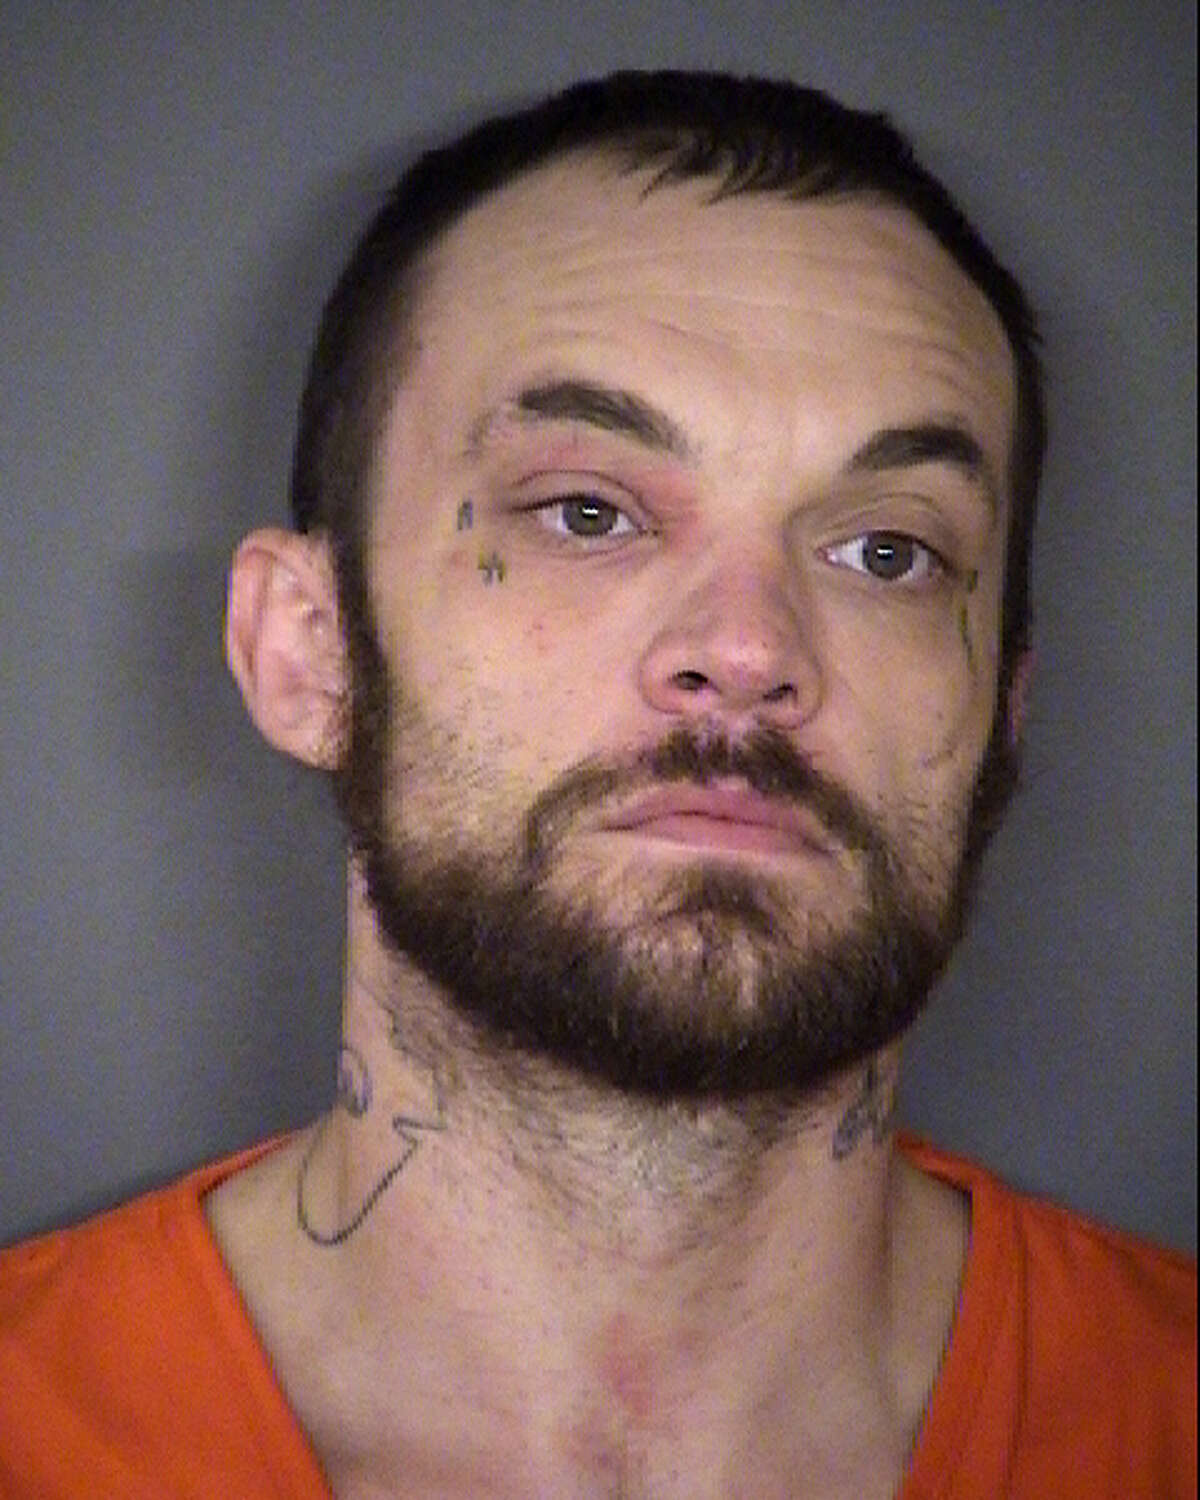 Garick Clayton, 31, was charged with capital murder in the death of 23-year-old Martin Gonzales.